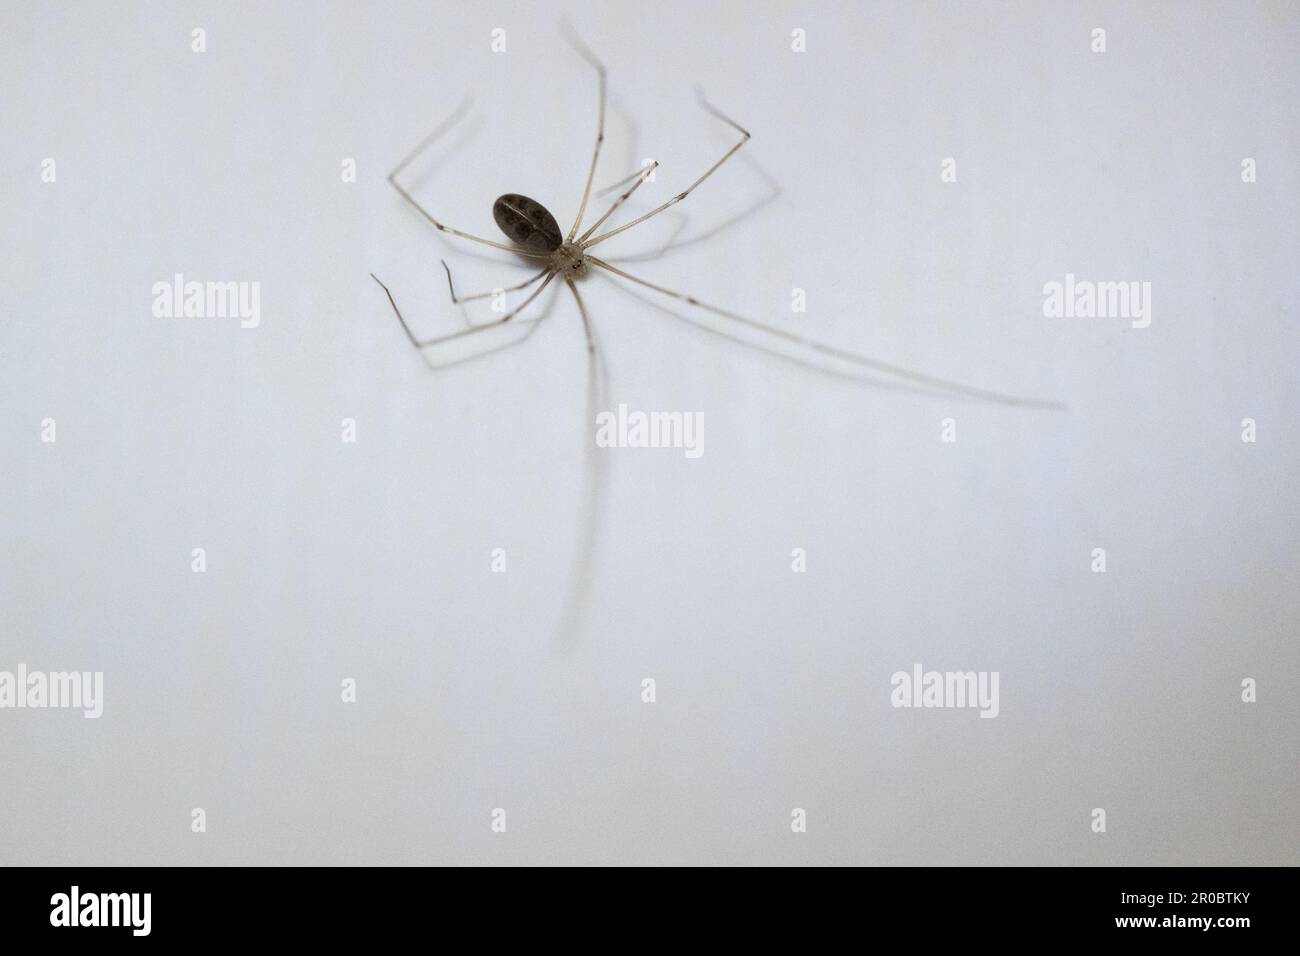 A daddy long legs spider (Pholcus phalangioides) on bathroom tile inside the home. Stock Photo